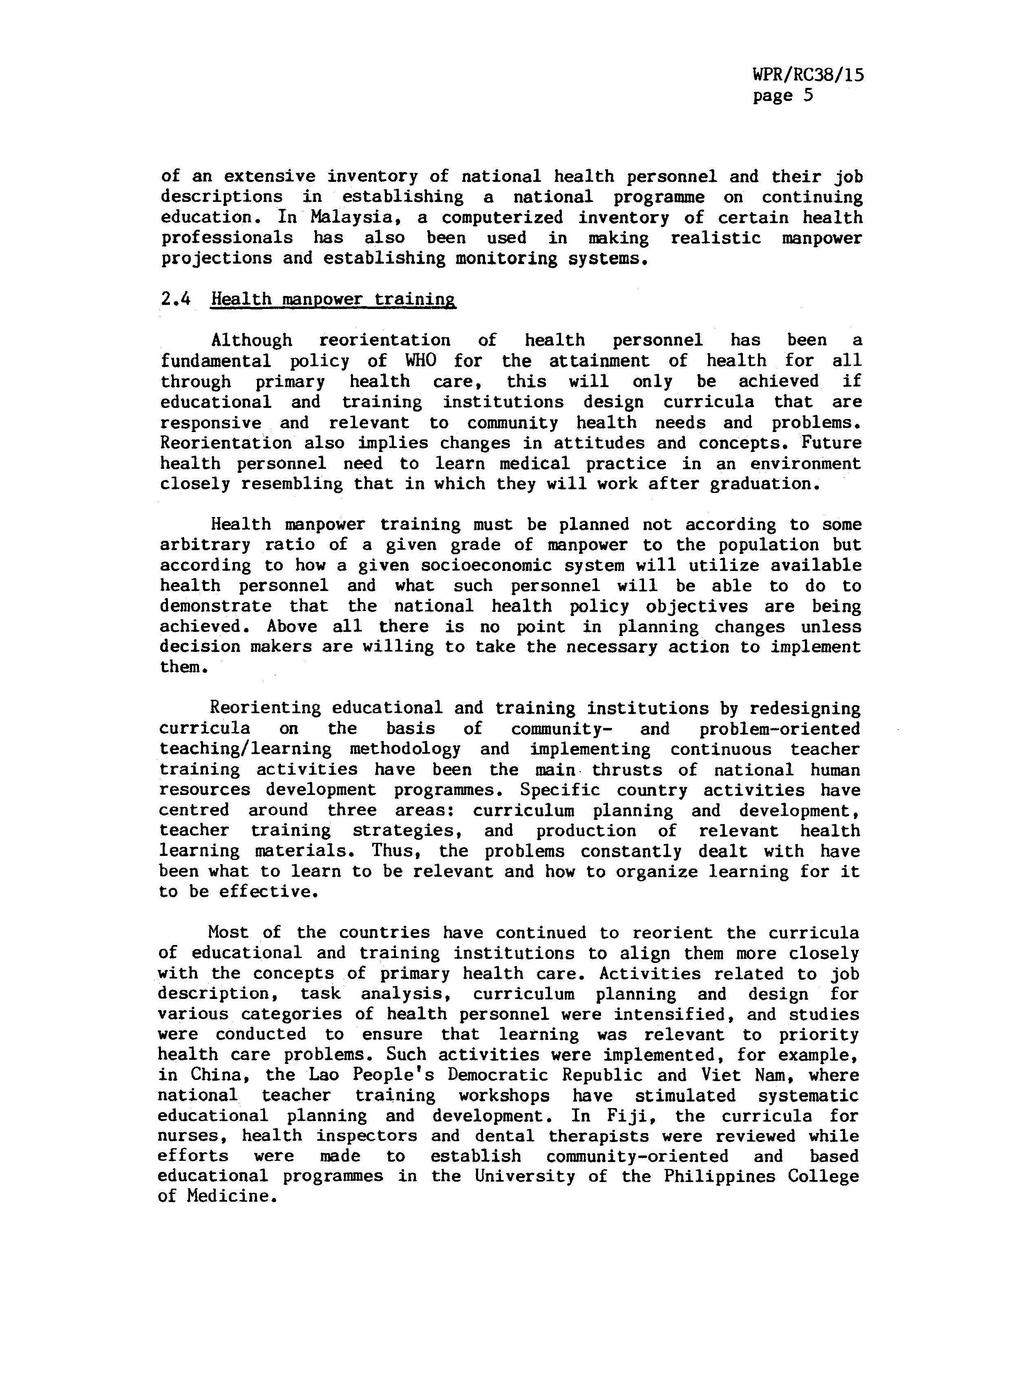 page 5 of an extensive inventory of national health personnel and their job descriptions in establishing a national programme on continuing education.